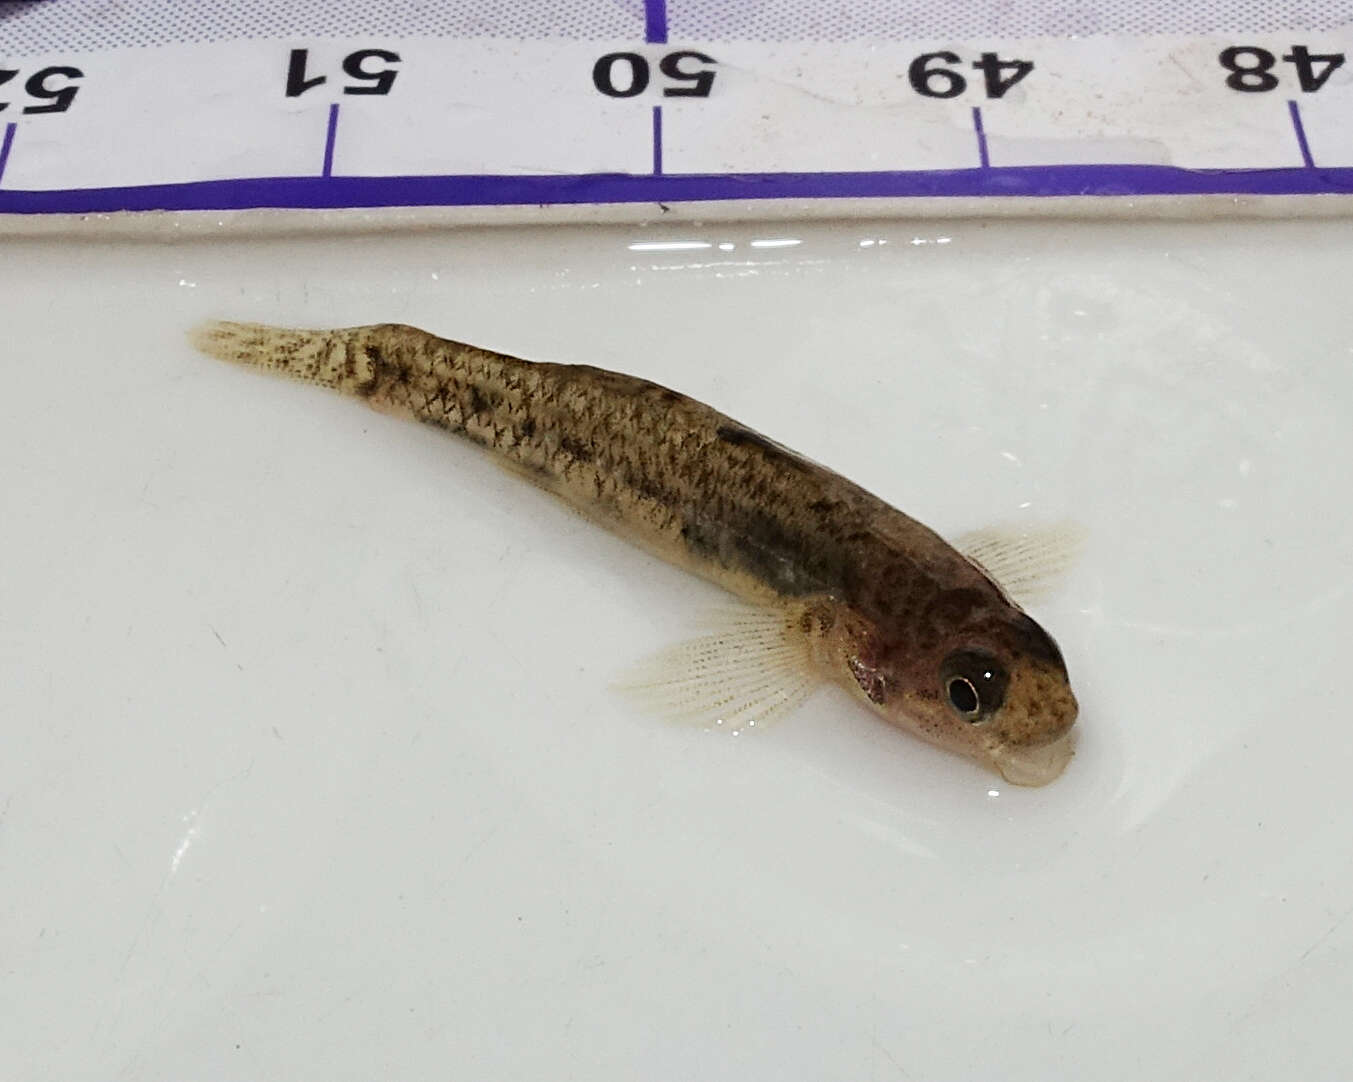 Image of Blue-spot goby